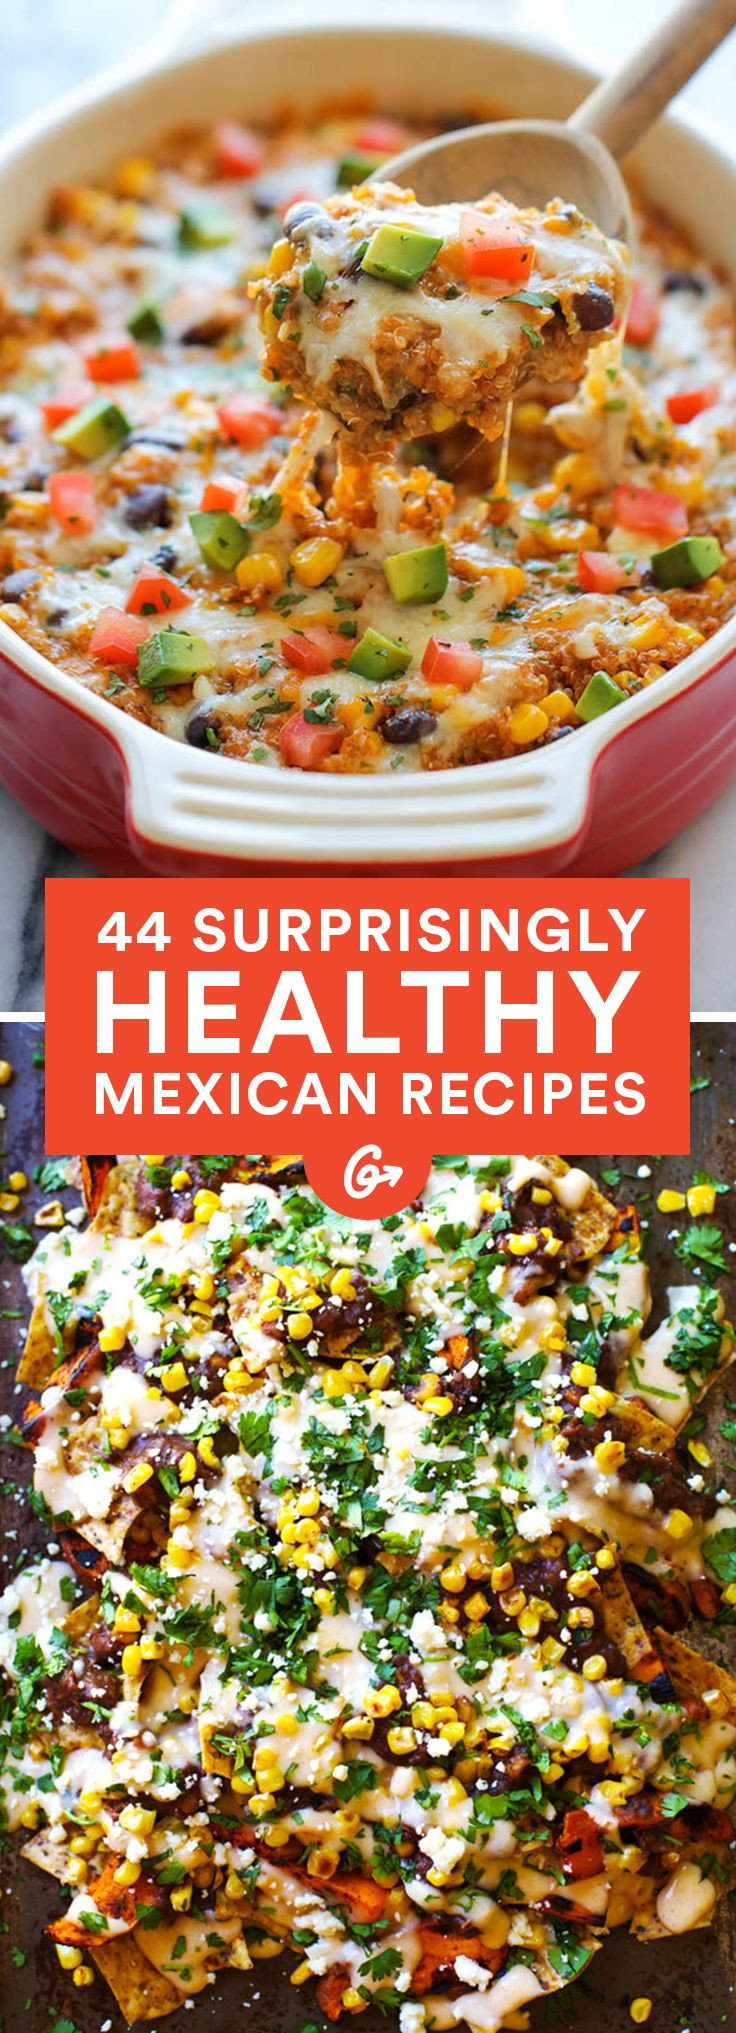 Healthy Mexican Dinner Recipes
 Best 25 Healthy mexican recipes ideas on Pinterest